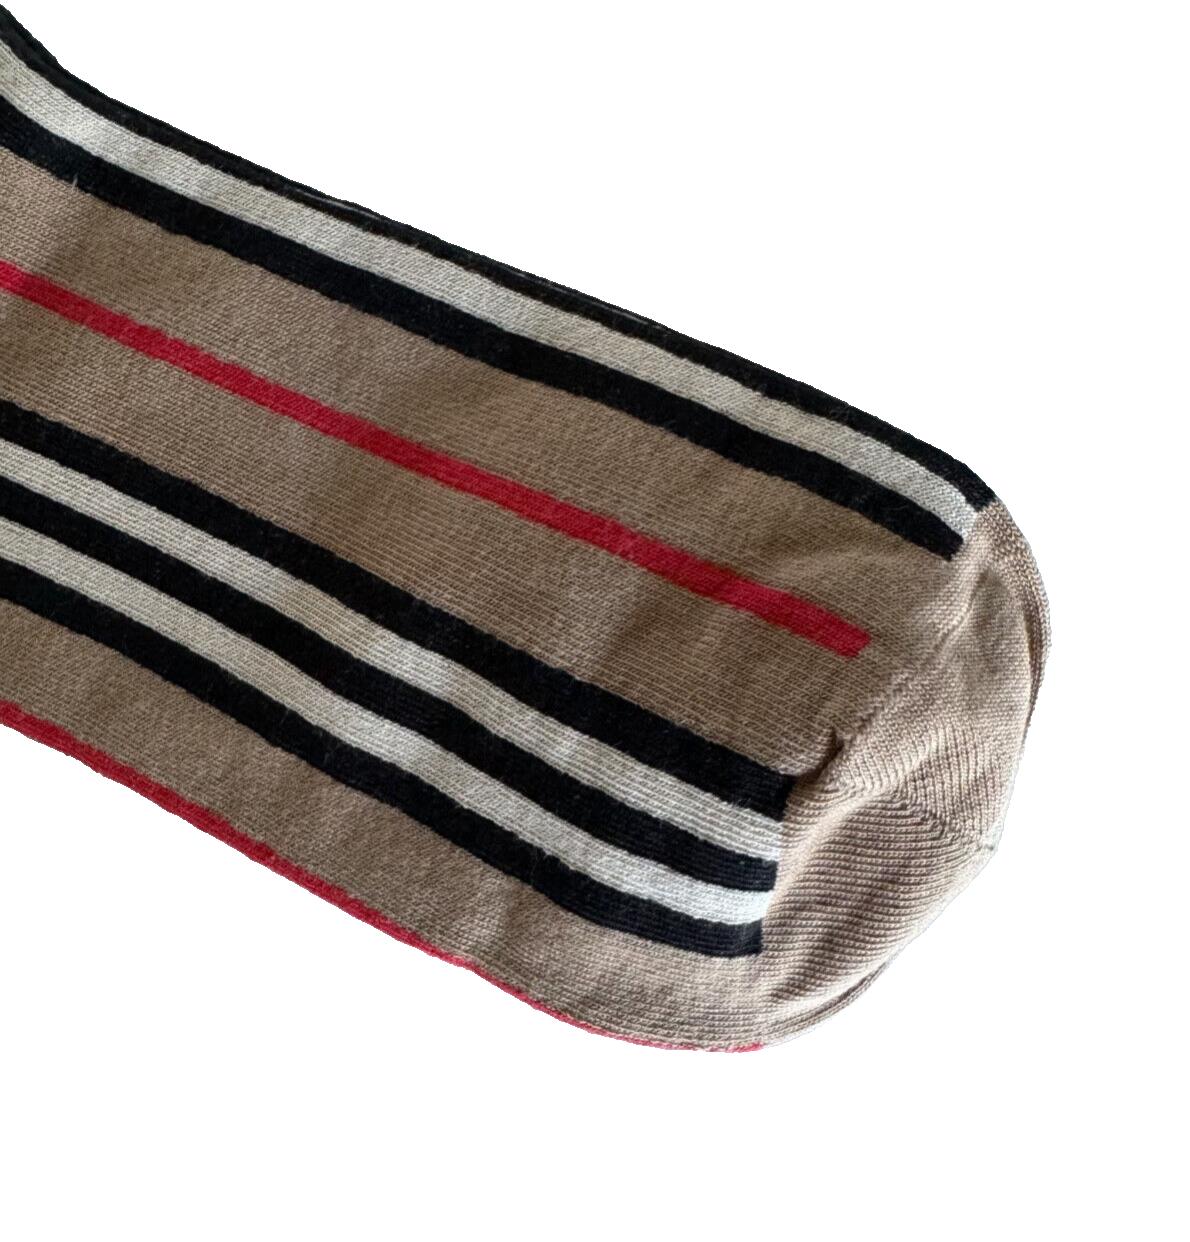 NWT Burberry Check Socks Beige Size Large (42-44 Euro)